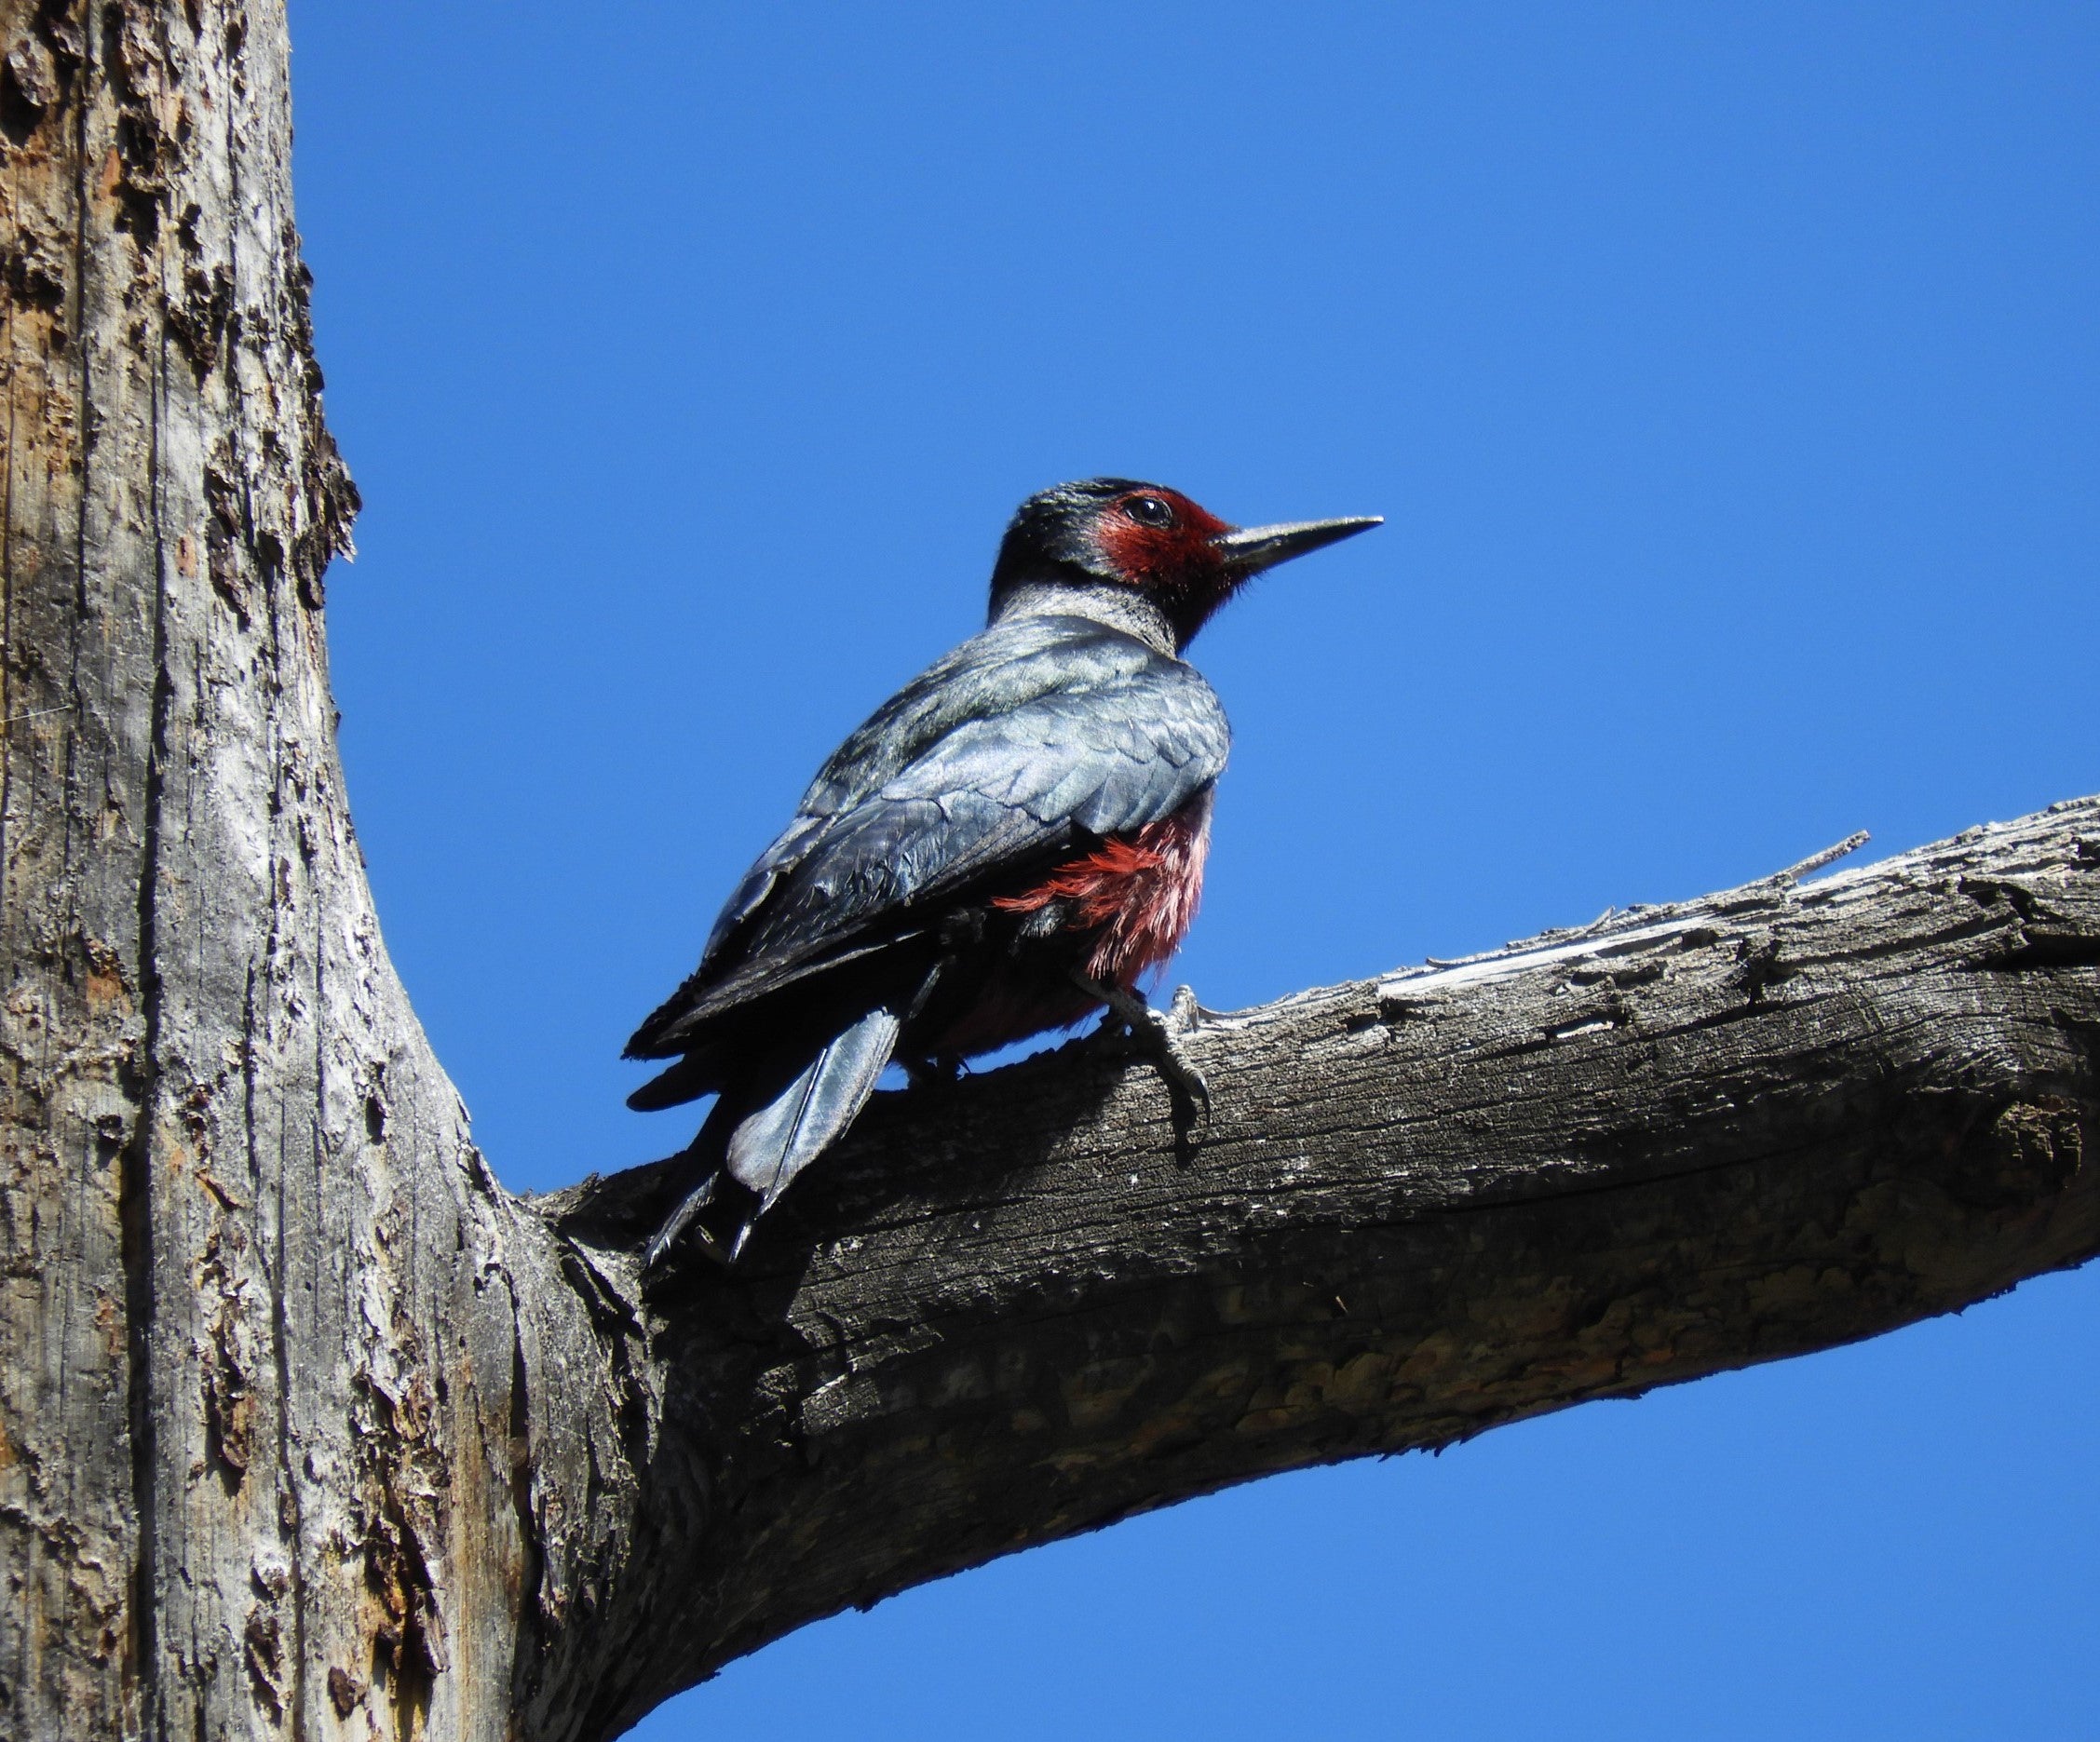 a closeup of a beautiful woodpecker with iridescent green-black back and rosy face